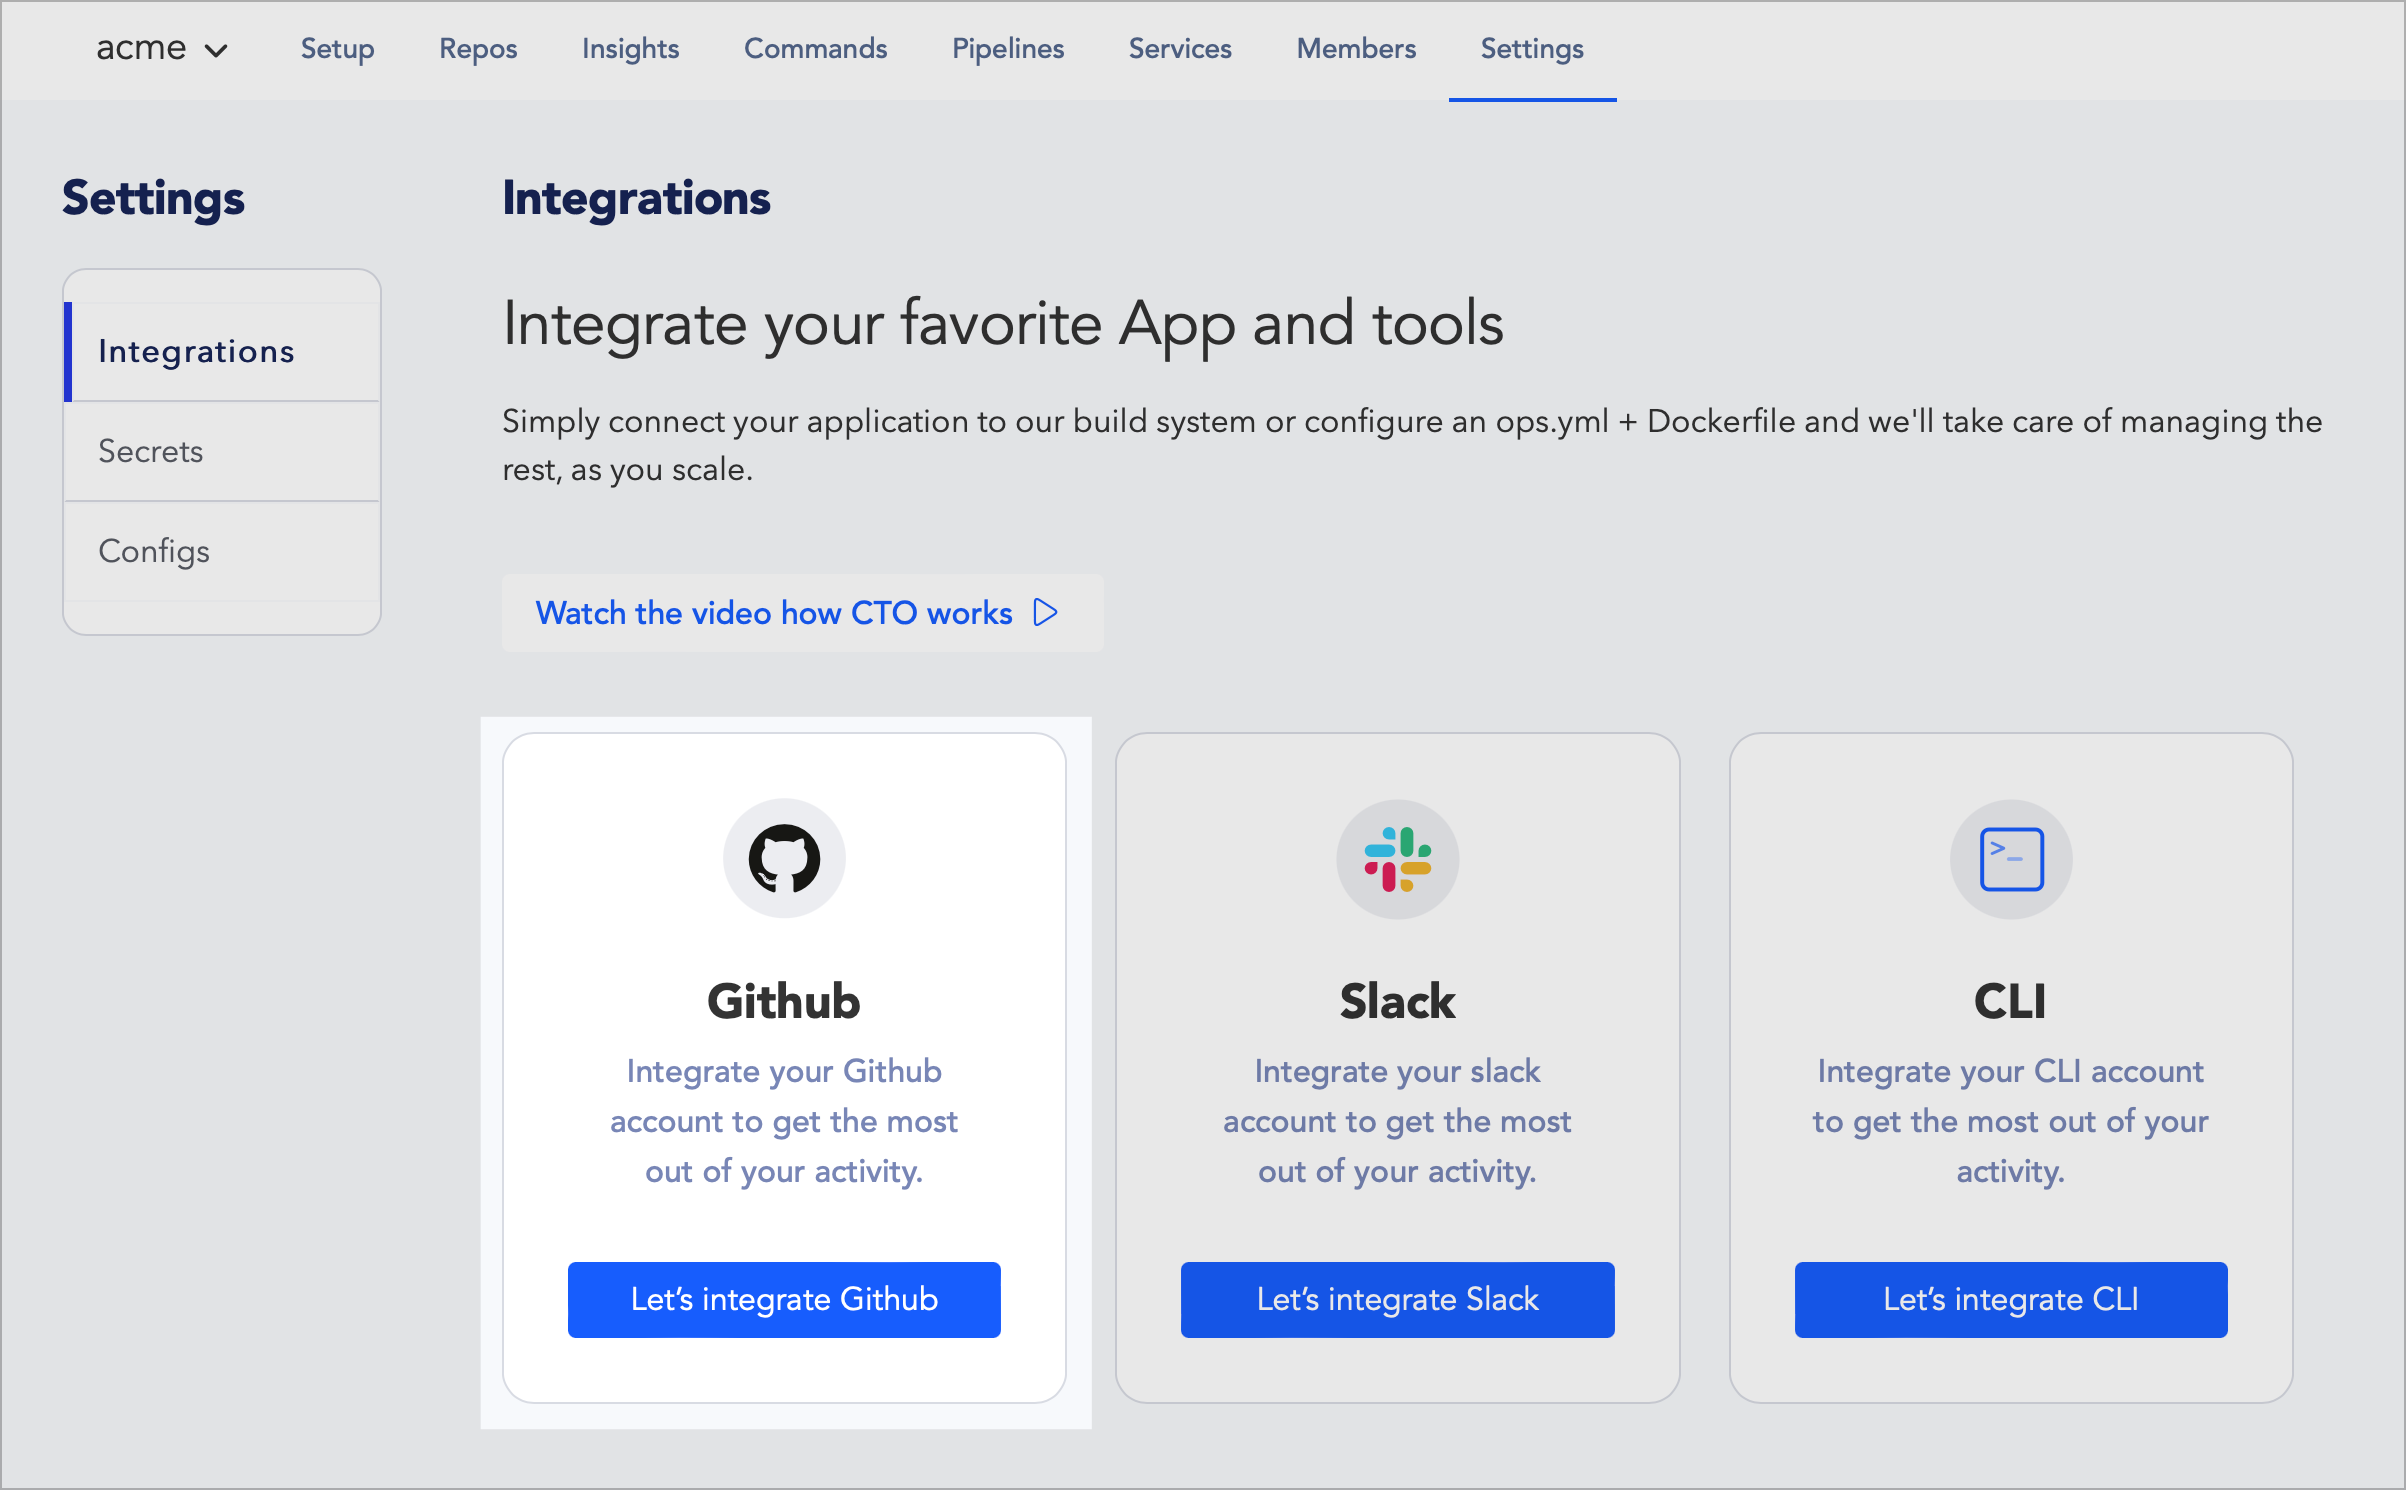 Click on "Let's integrate GitHub" from the Integrations tab of the Settings page.